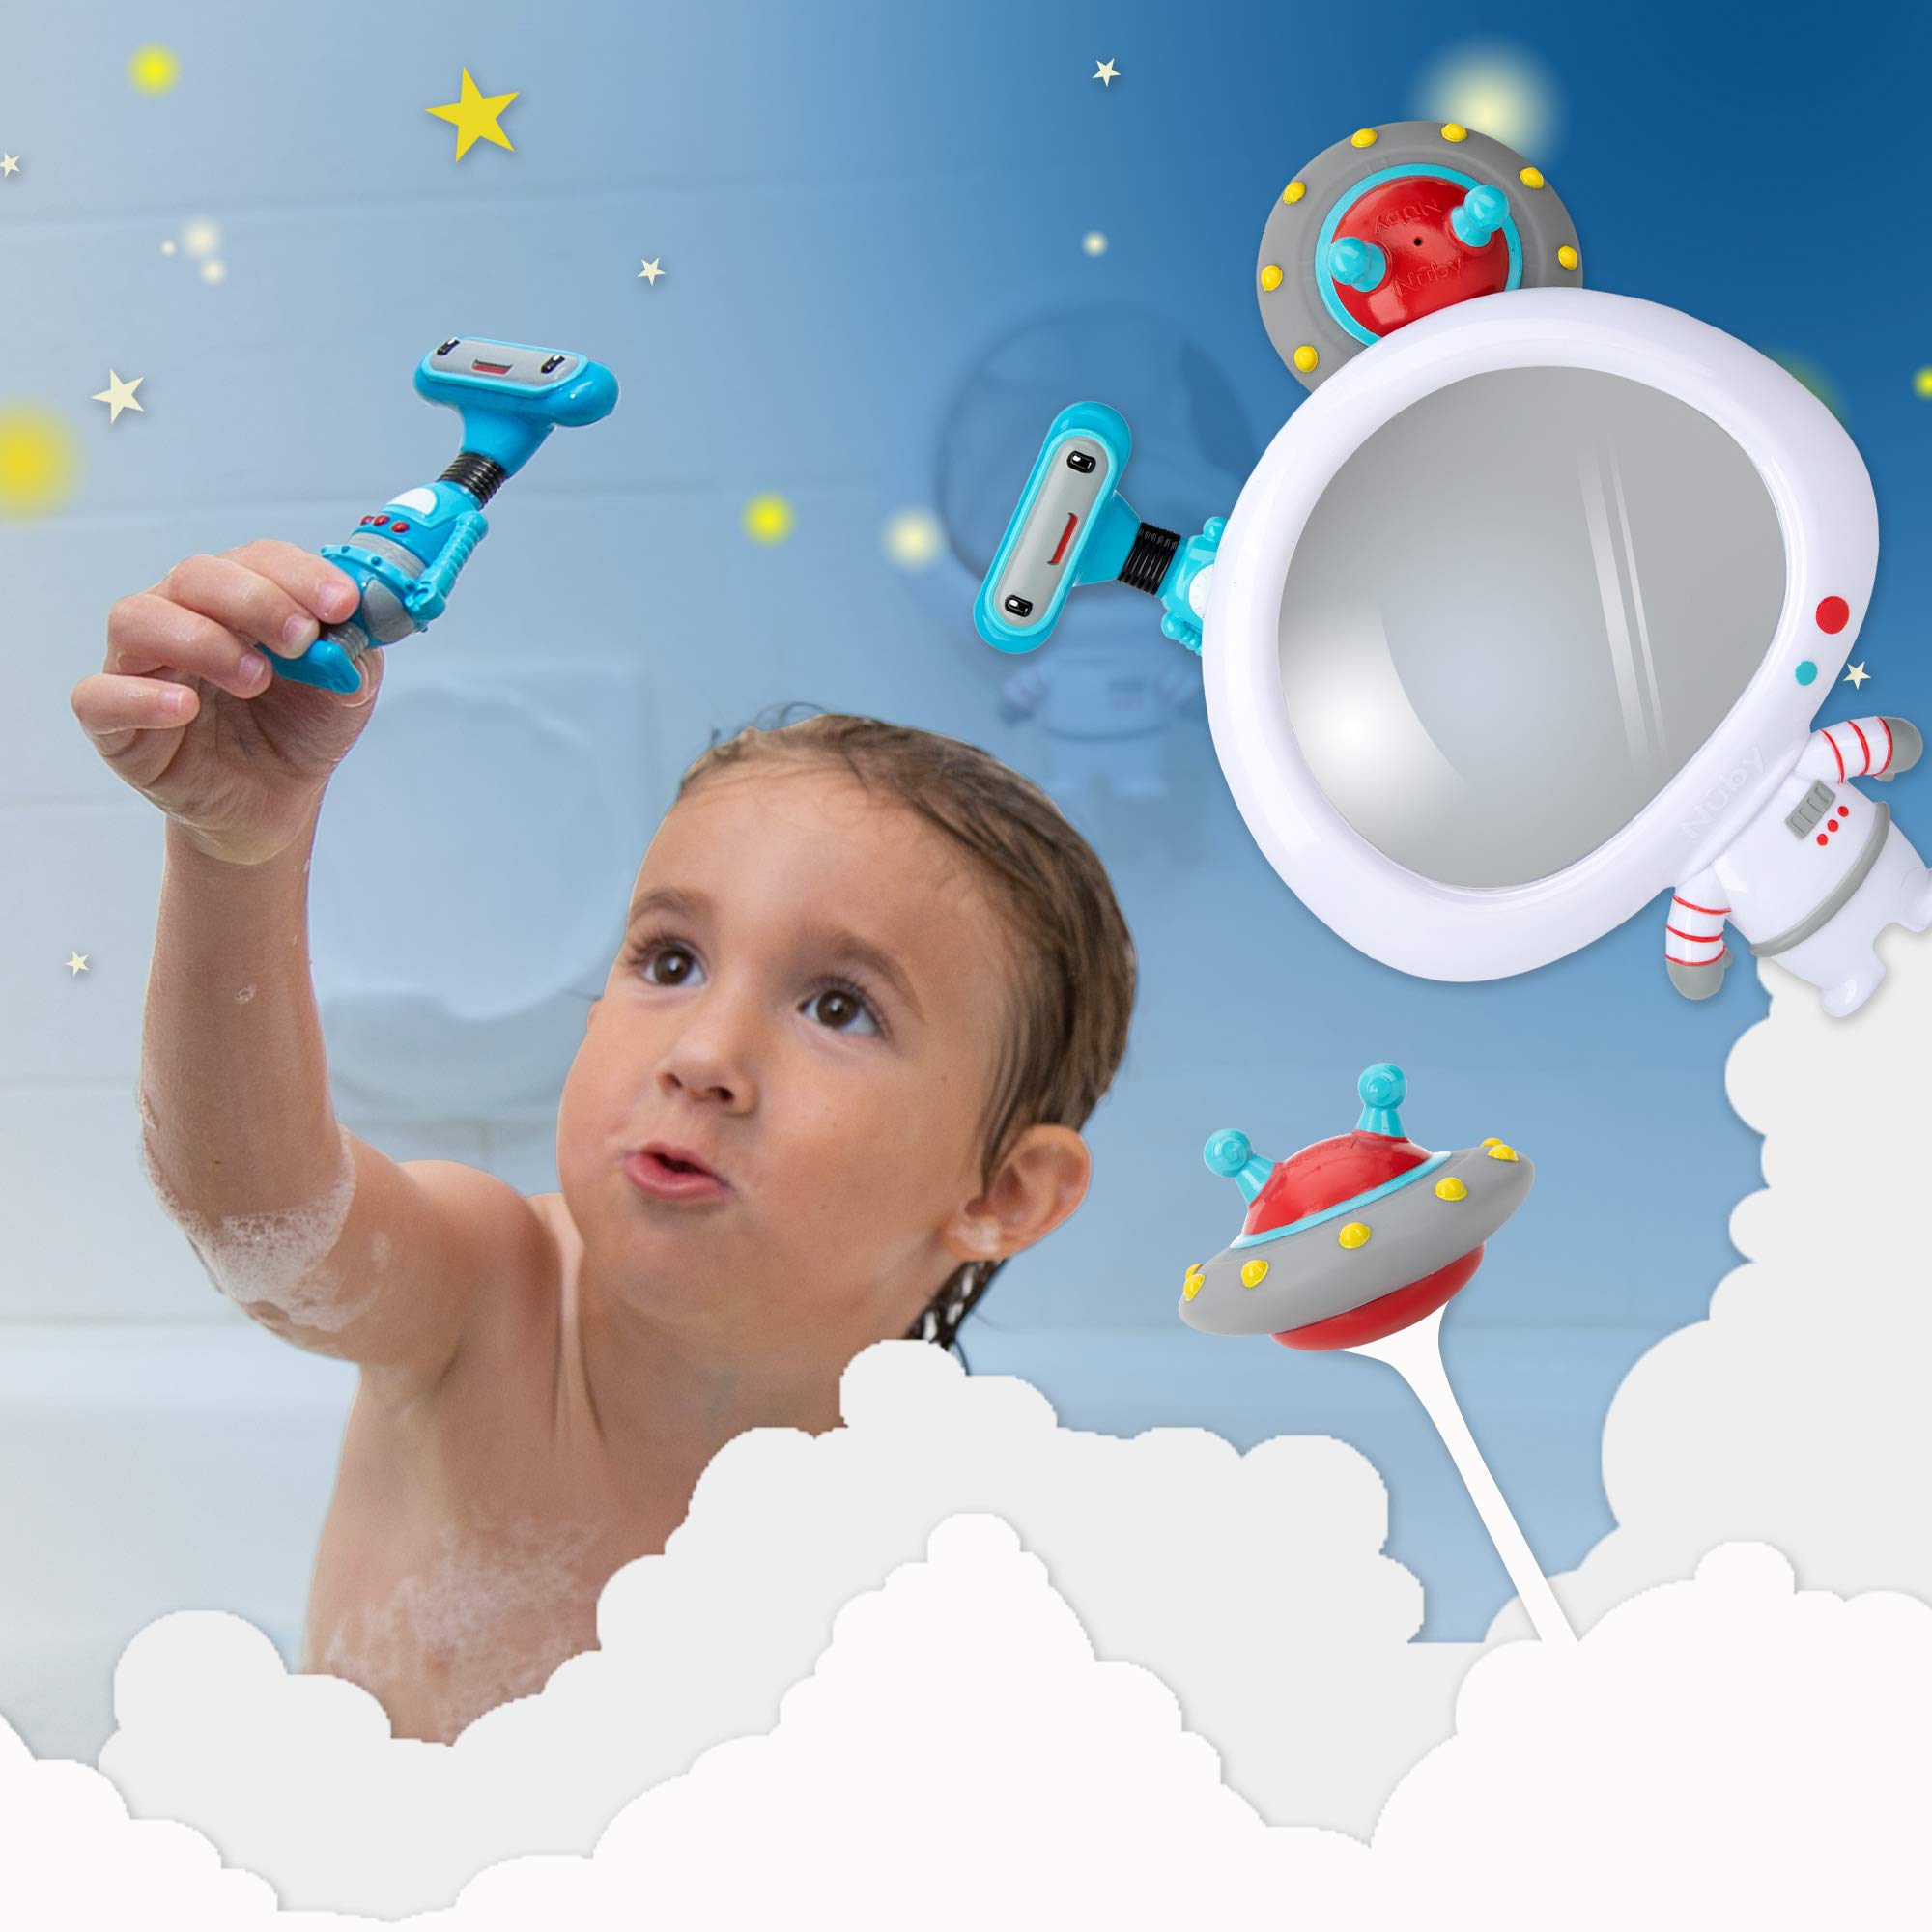 Nuby Awesome Astronaut Mirror Interactive Baby Toy Set for Fun Bath Time, 3 Piece Set